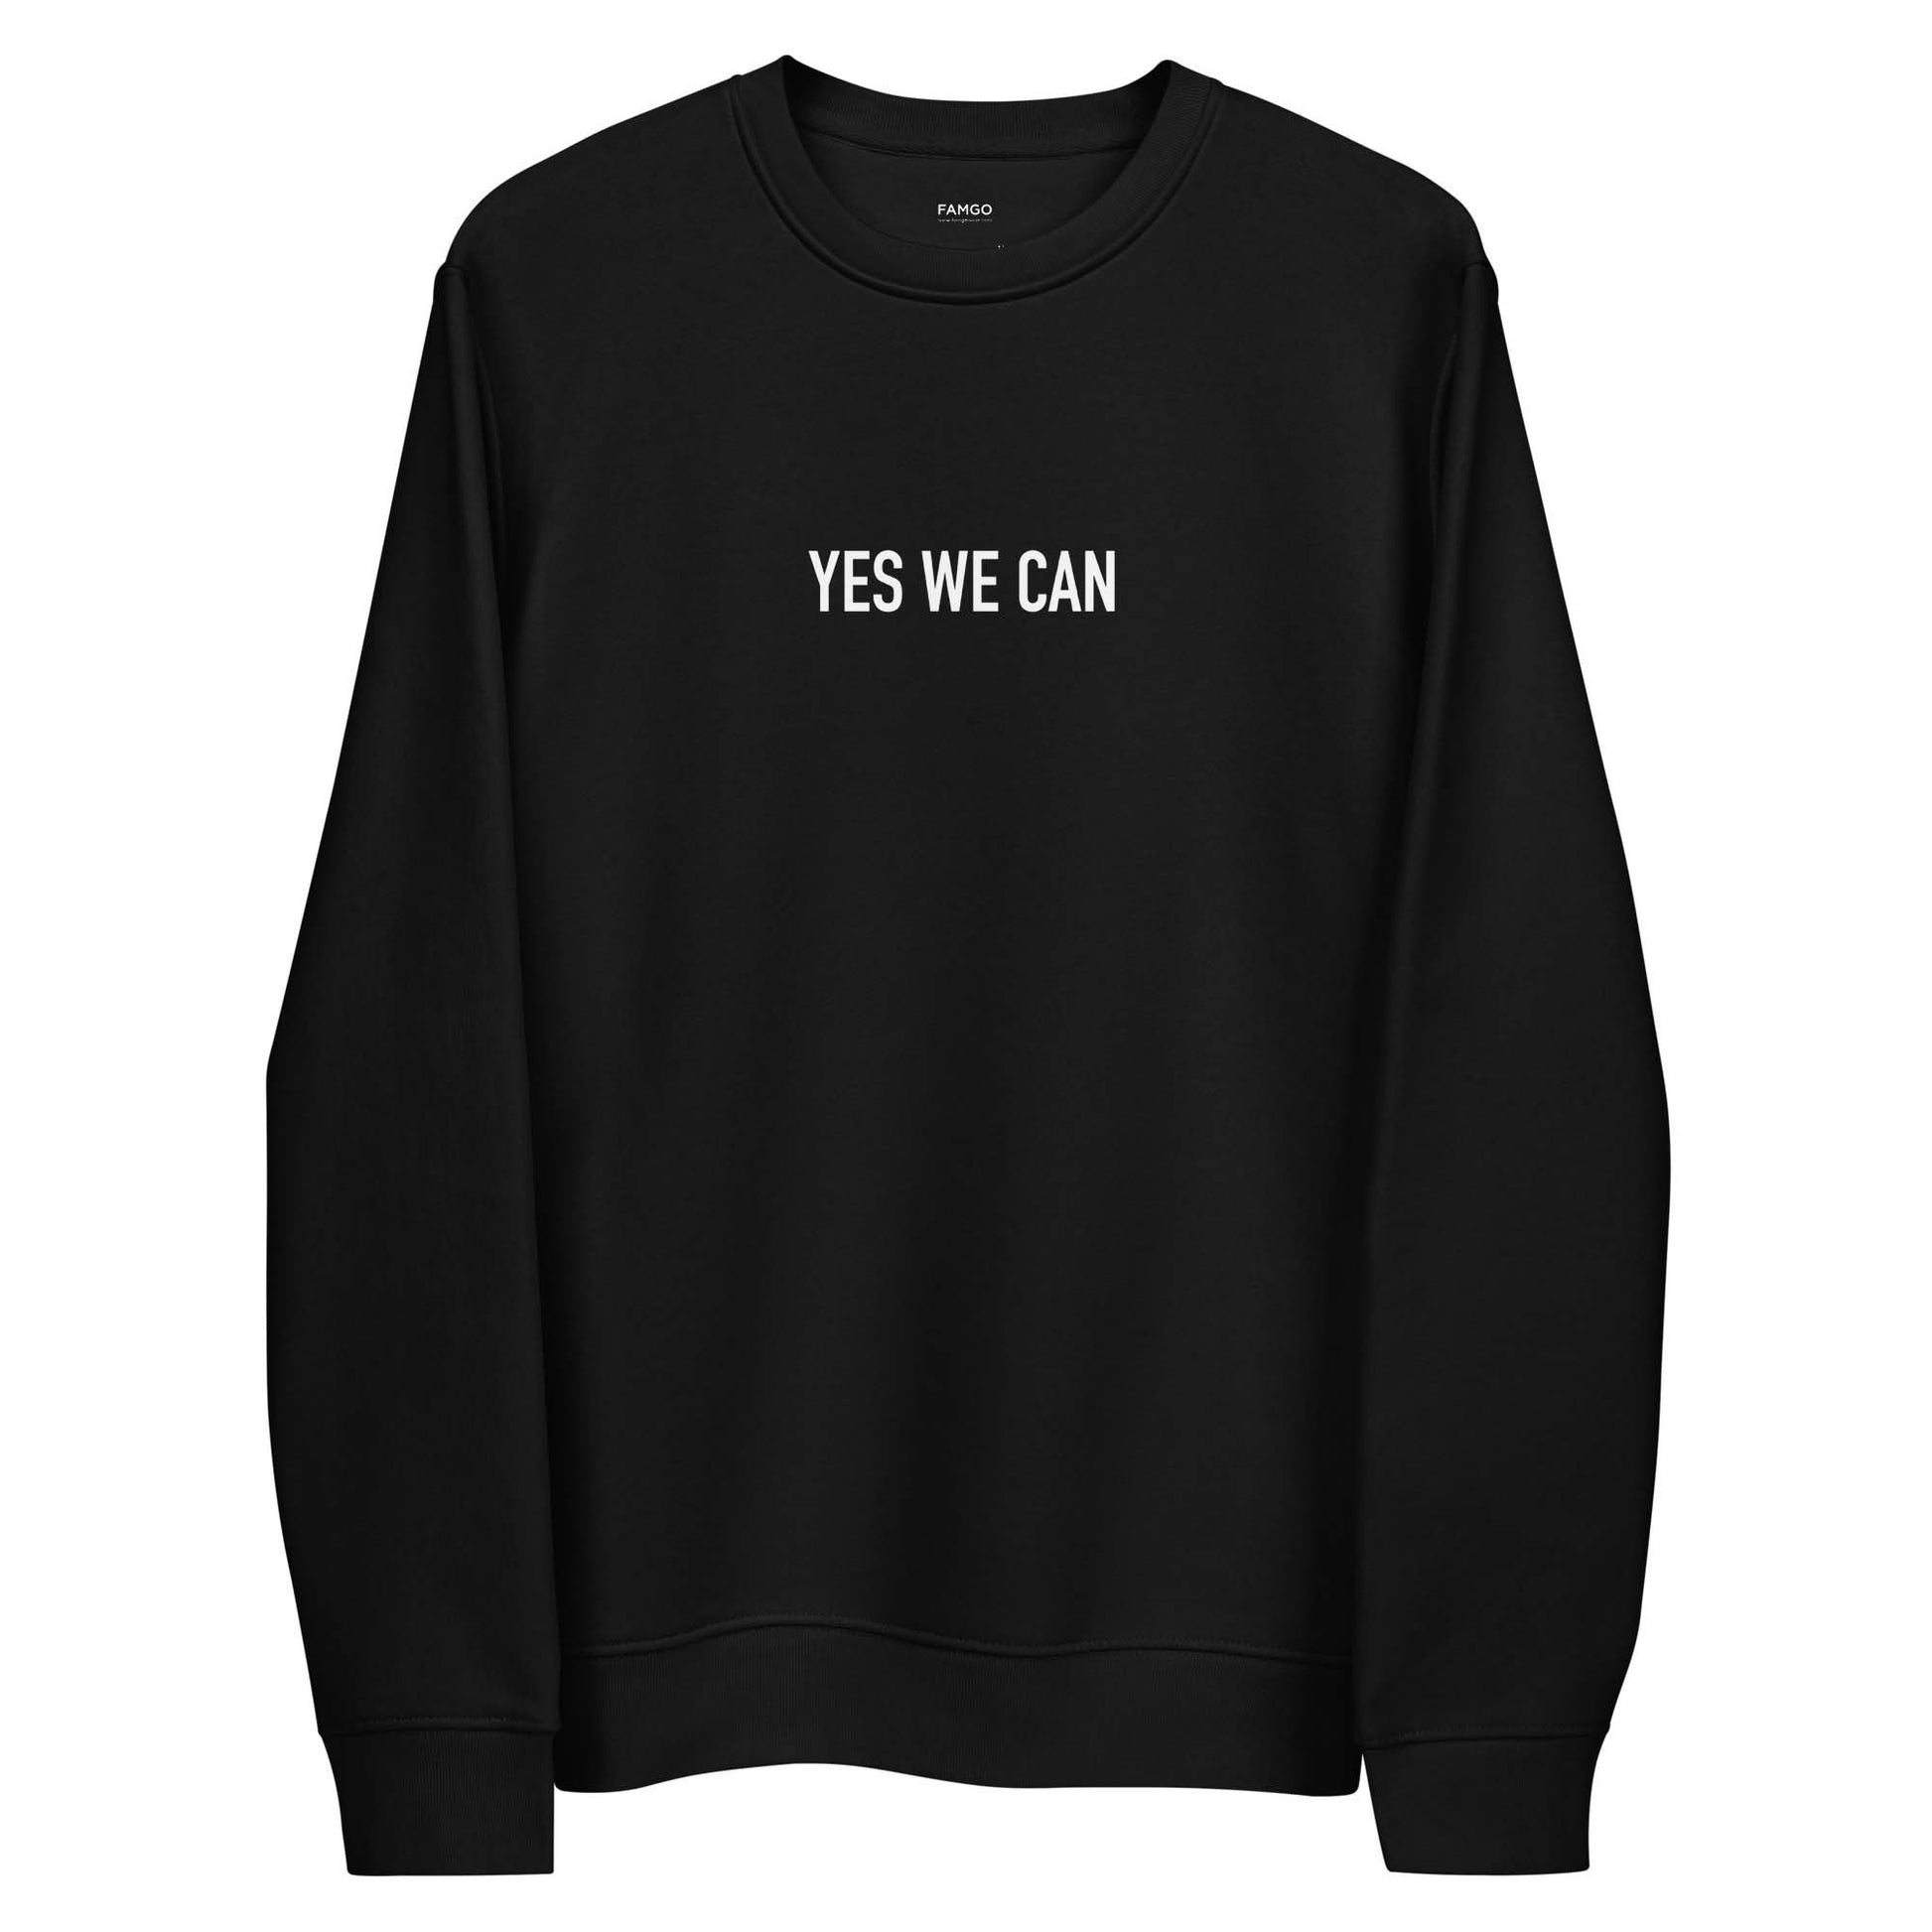 Women black positive sweatshirt with Barack Obama's inspirational quote, "Yes We Can." 